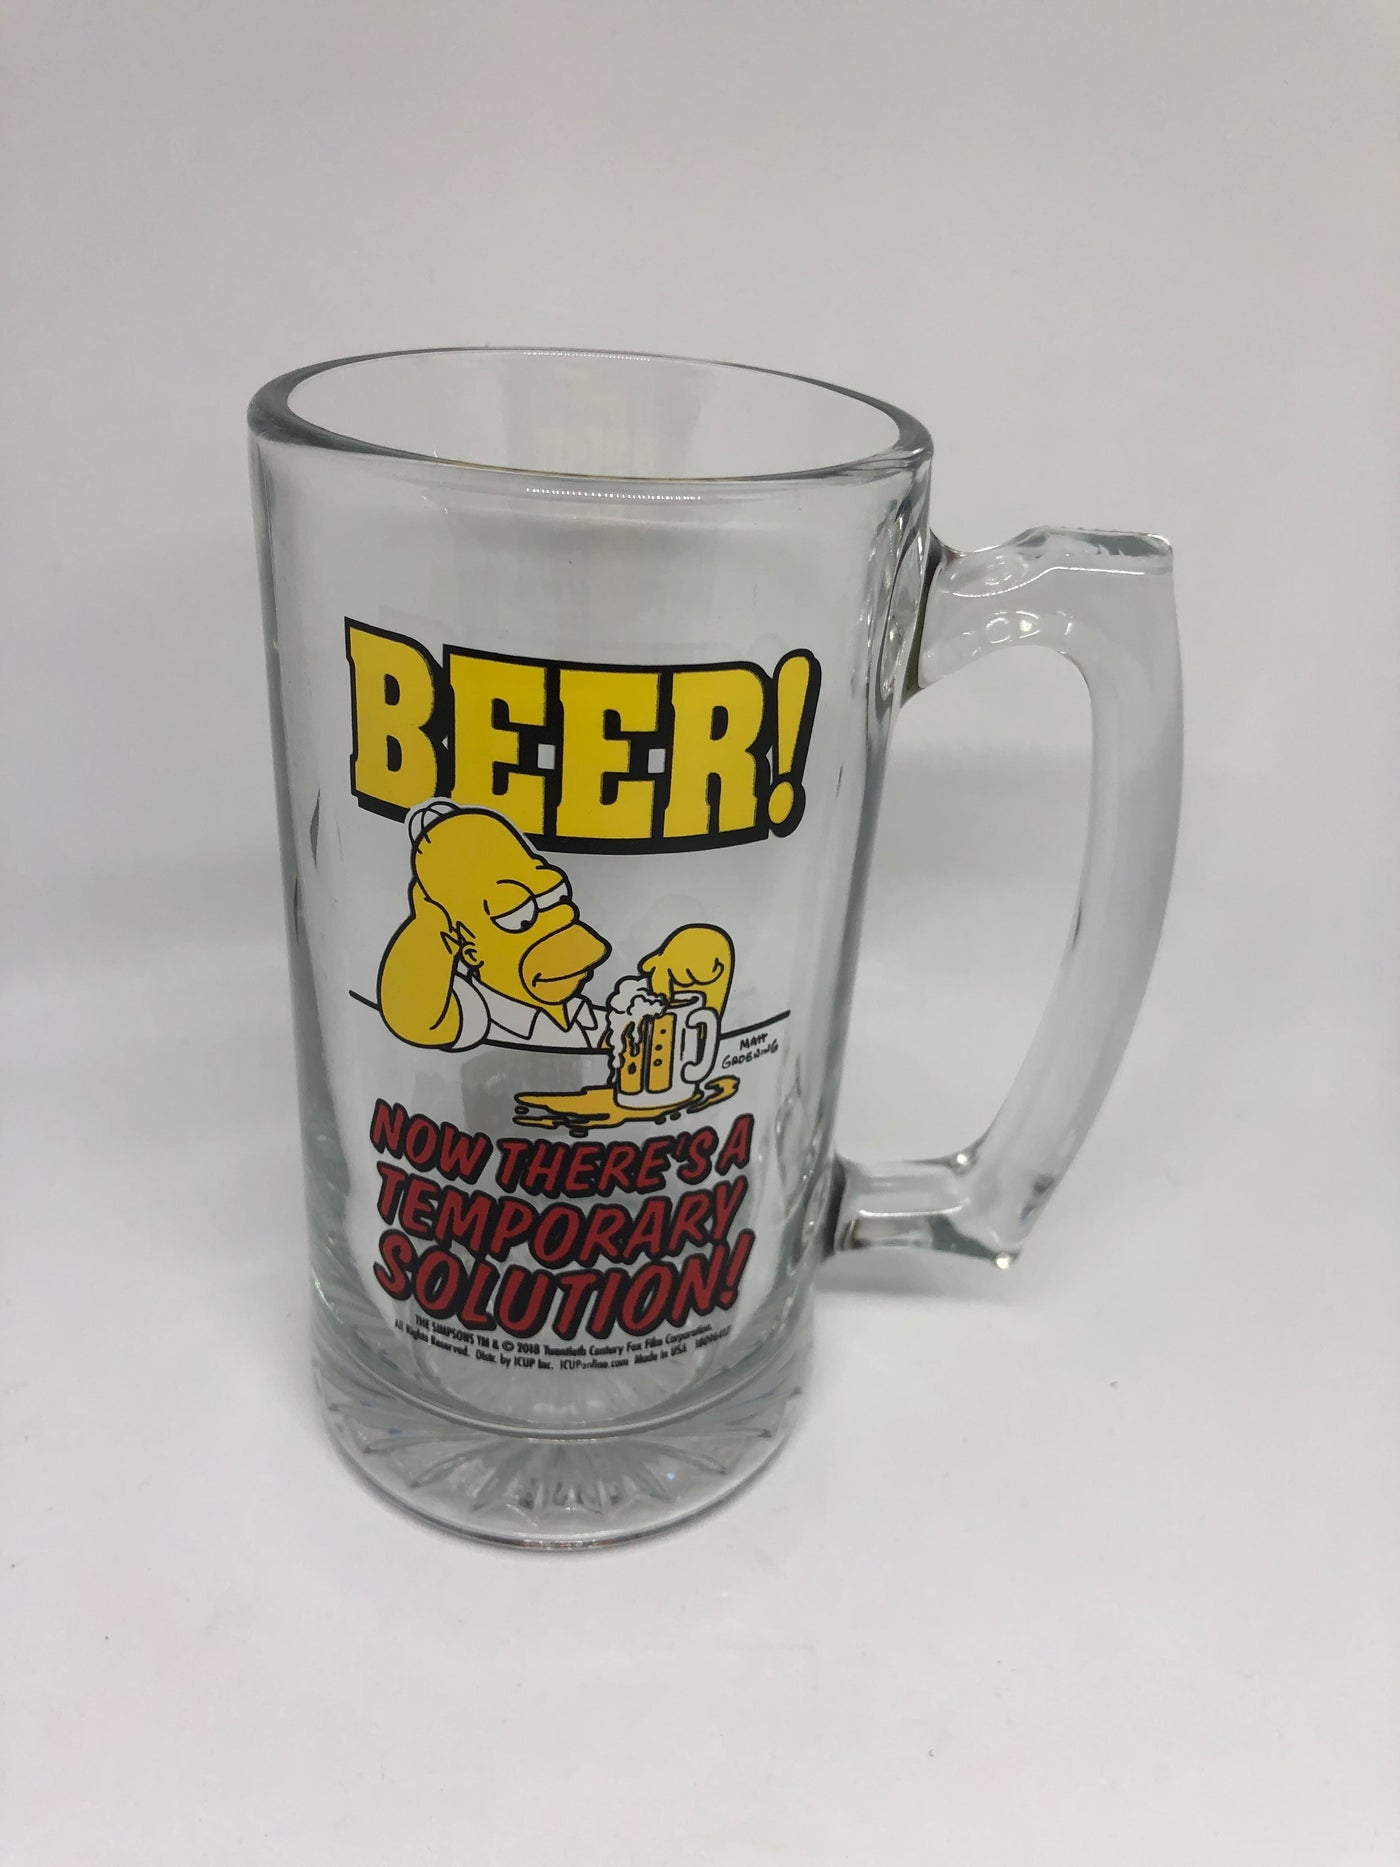 Universal The Simpsons Homer Beer Now There's a Temporary Solution Glass New